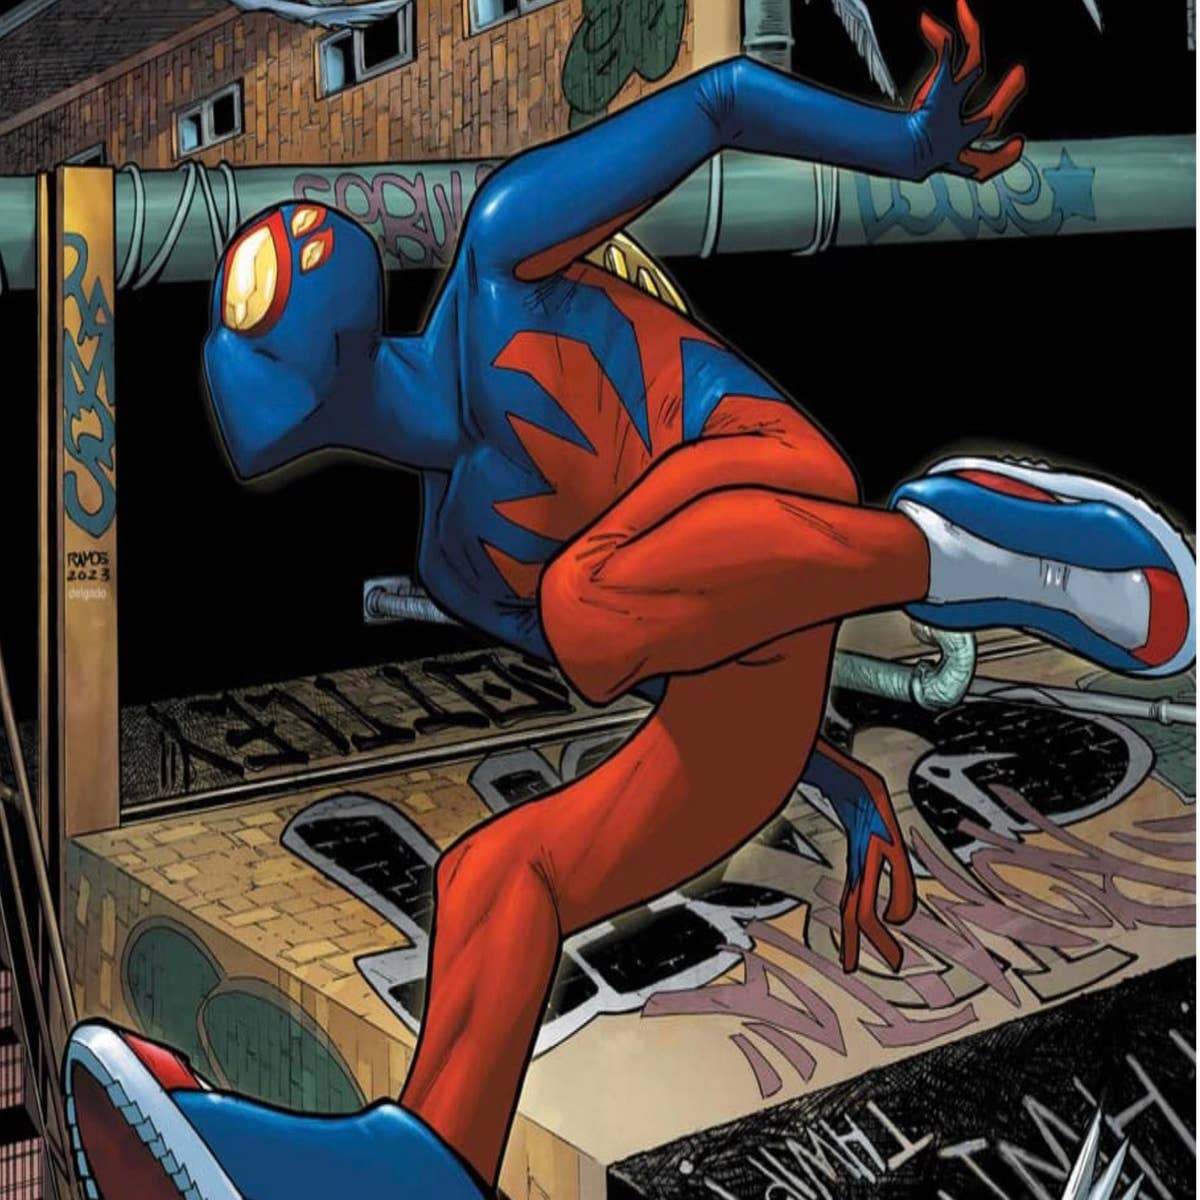 Meet Spider-Boy, the hero who might be the Marvel's next Spider